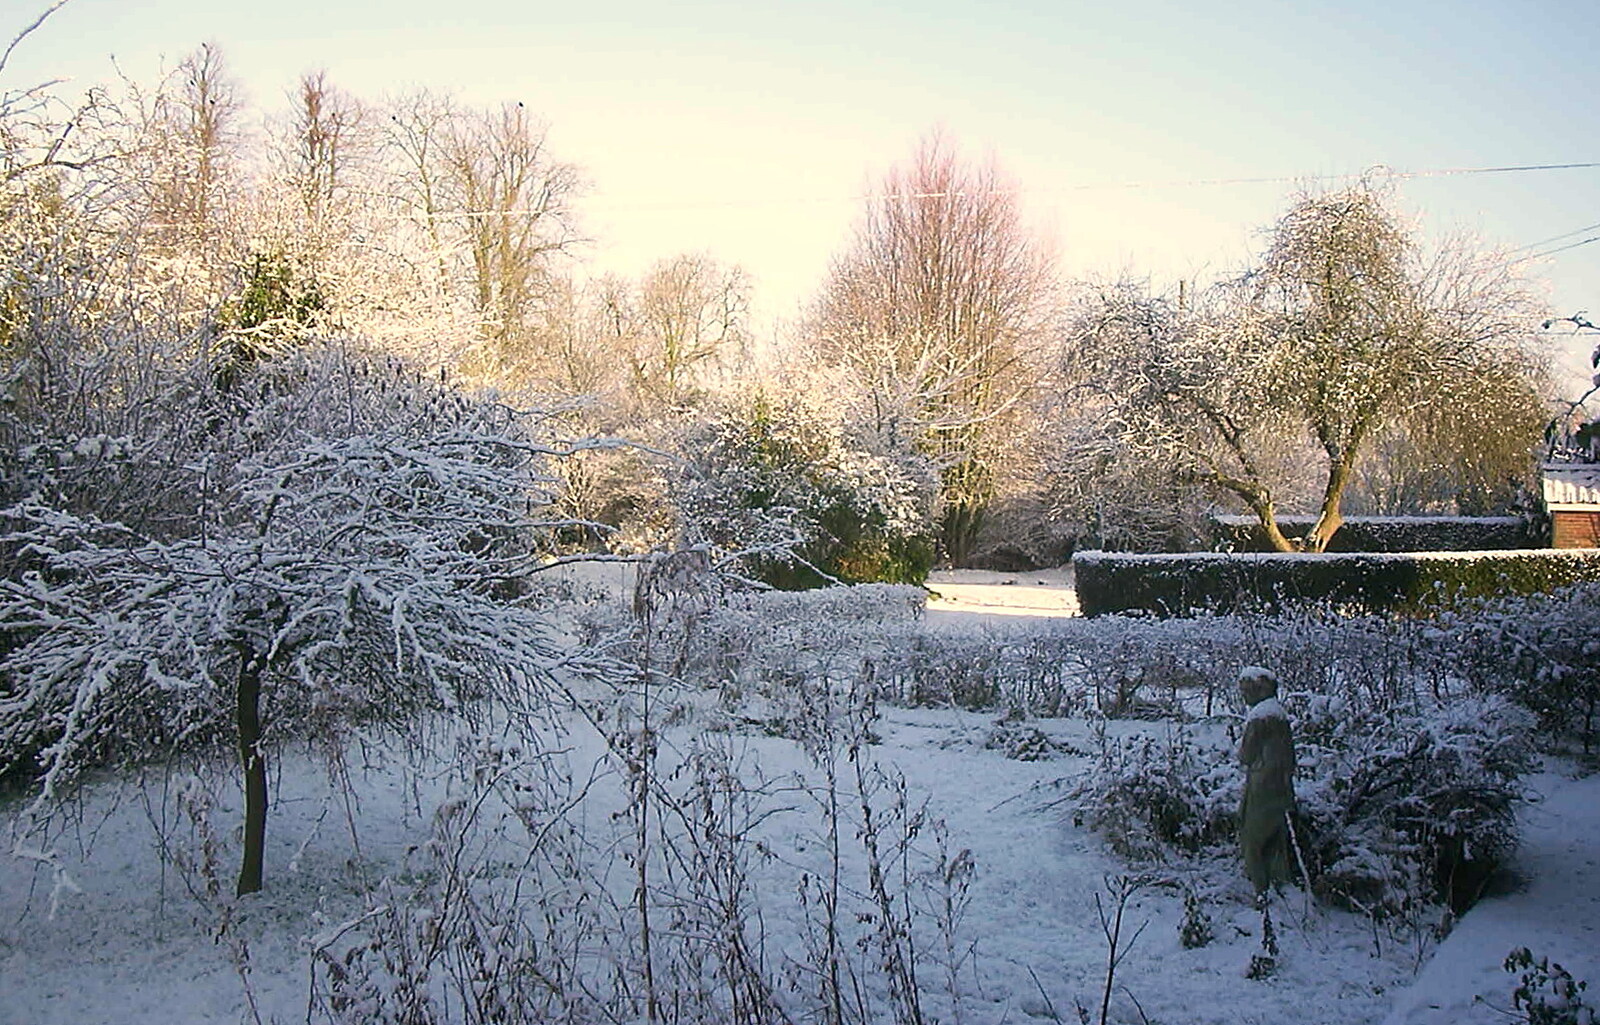 The front garden looks like a Christmas card from The House in Snow and a Carburettor, Brome, Suffolk - 20th December 2002